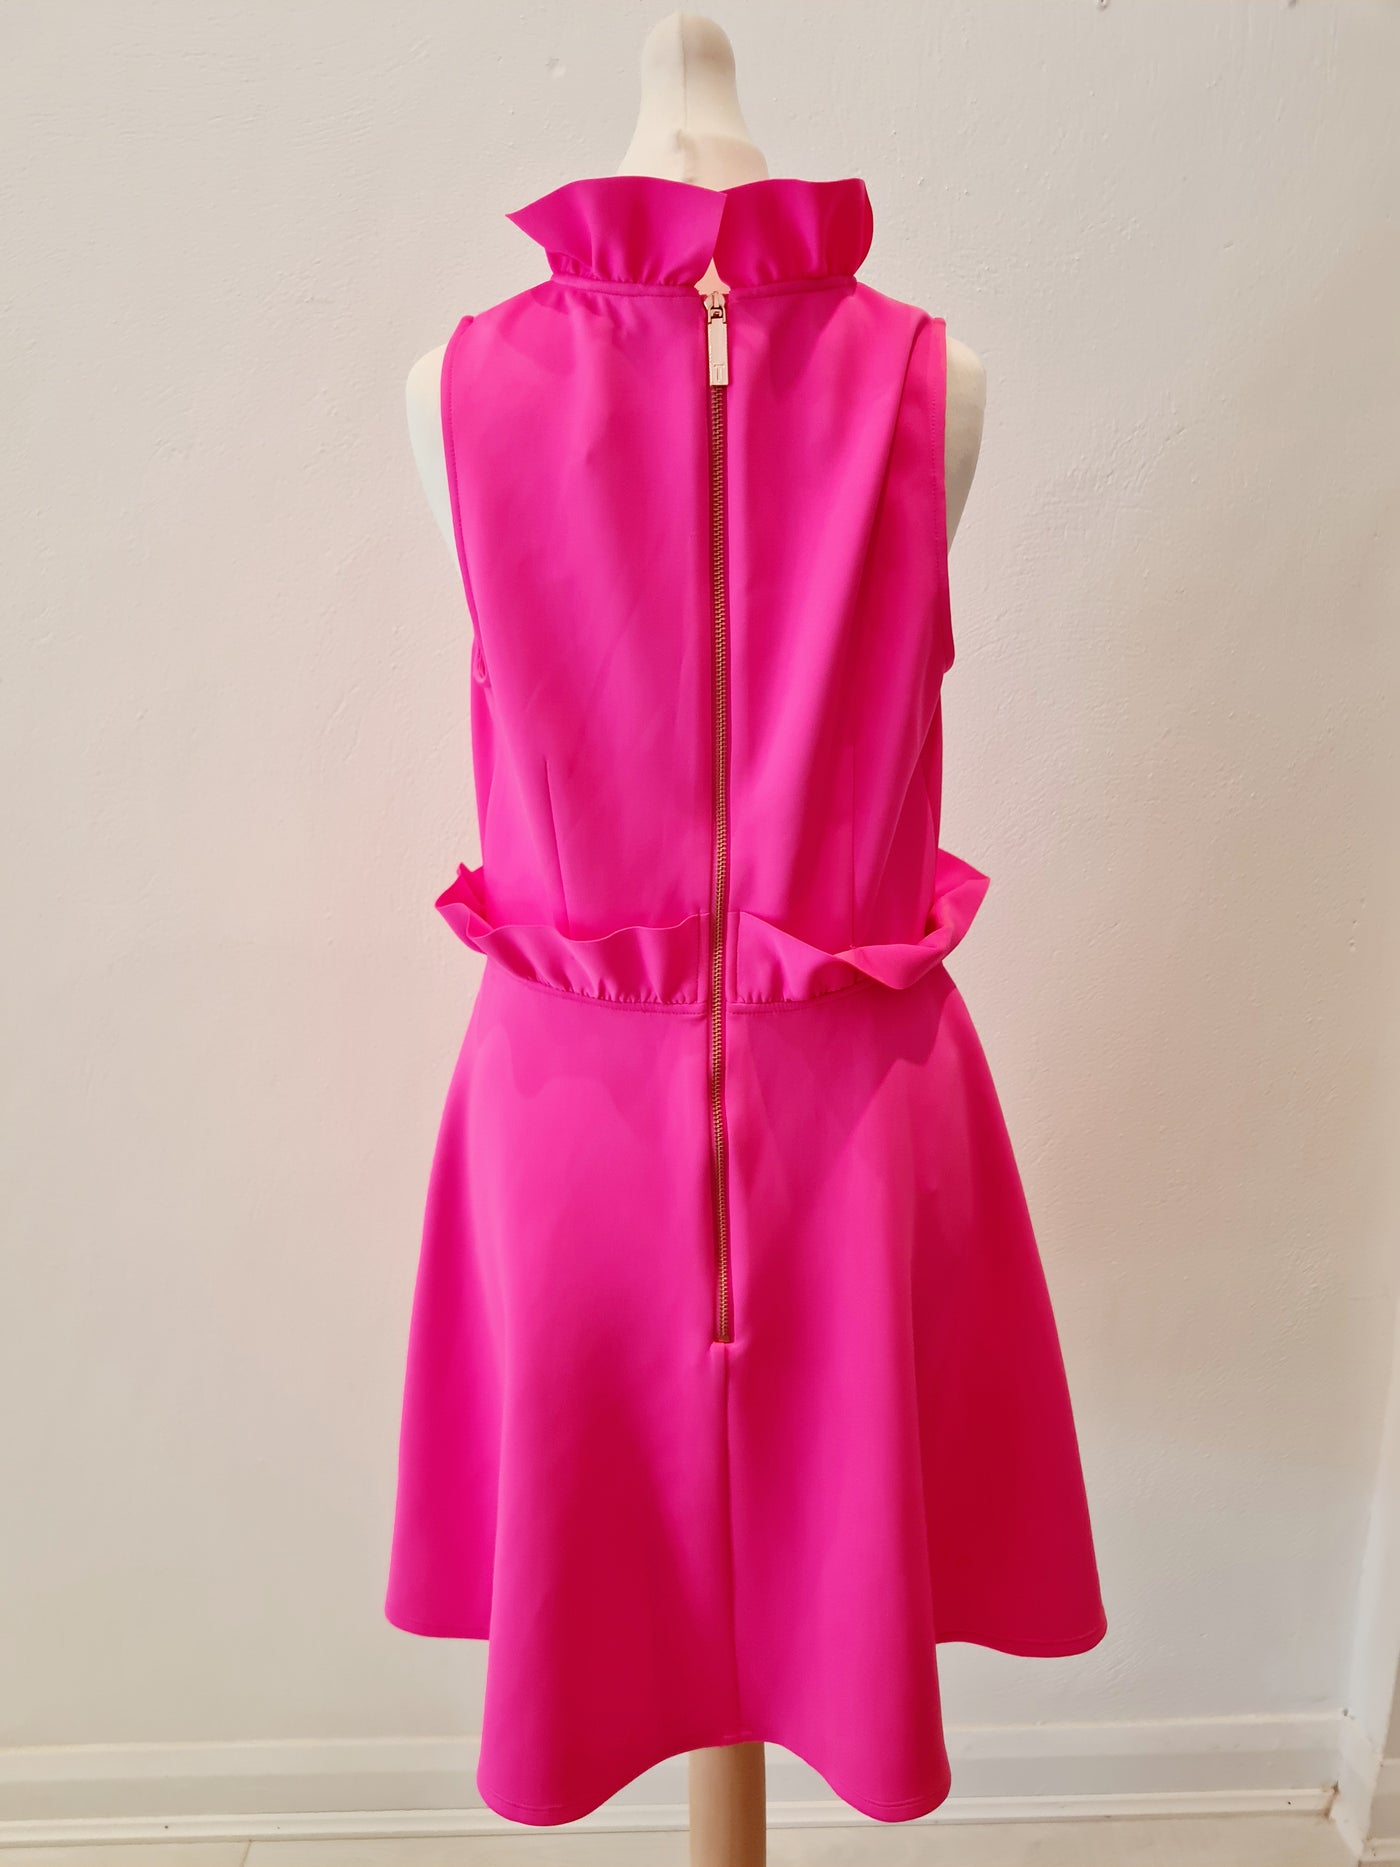 Ted Baker neon pink dress 3 New RRP £139